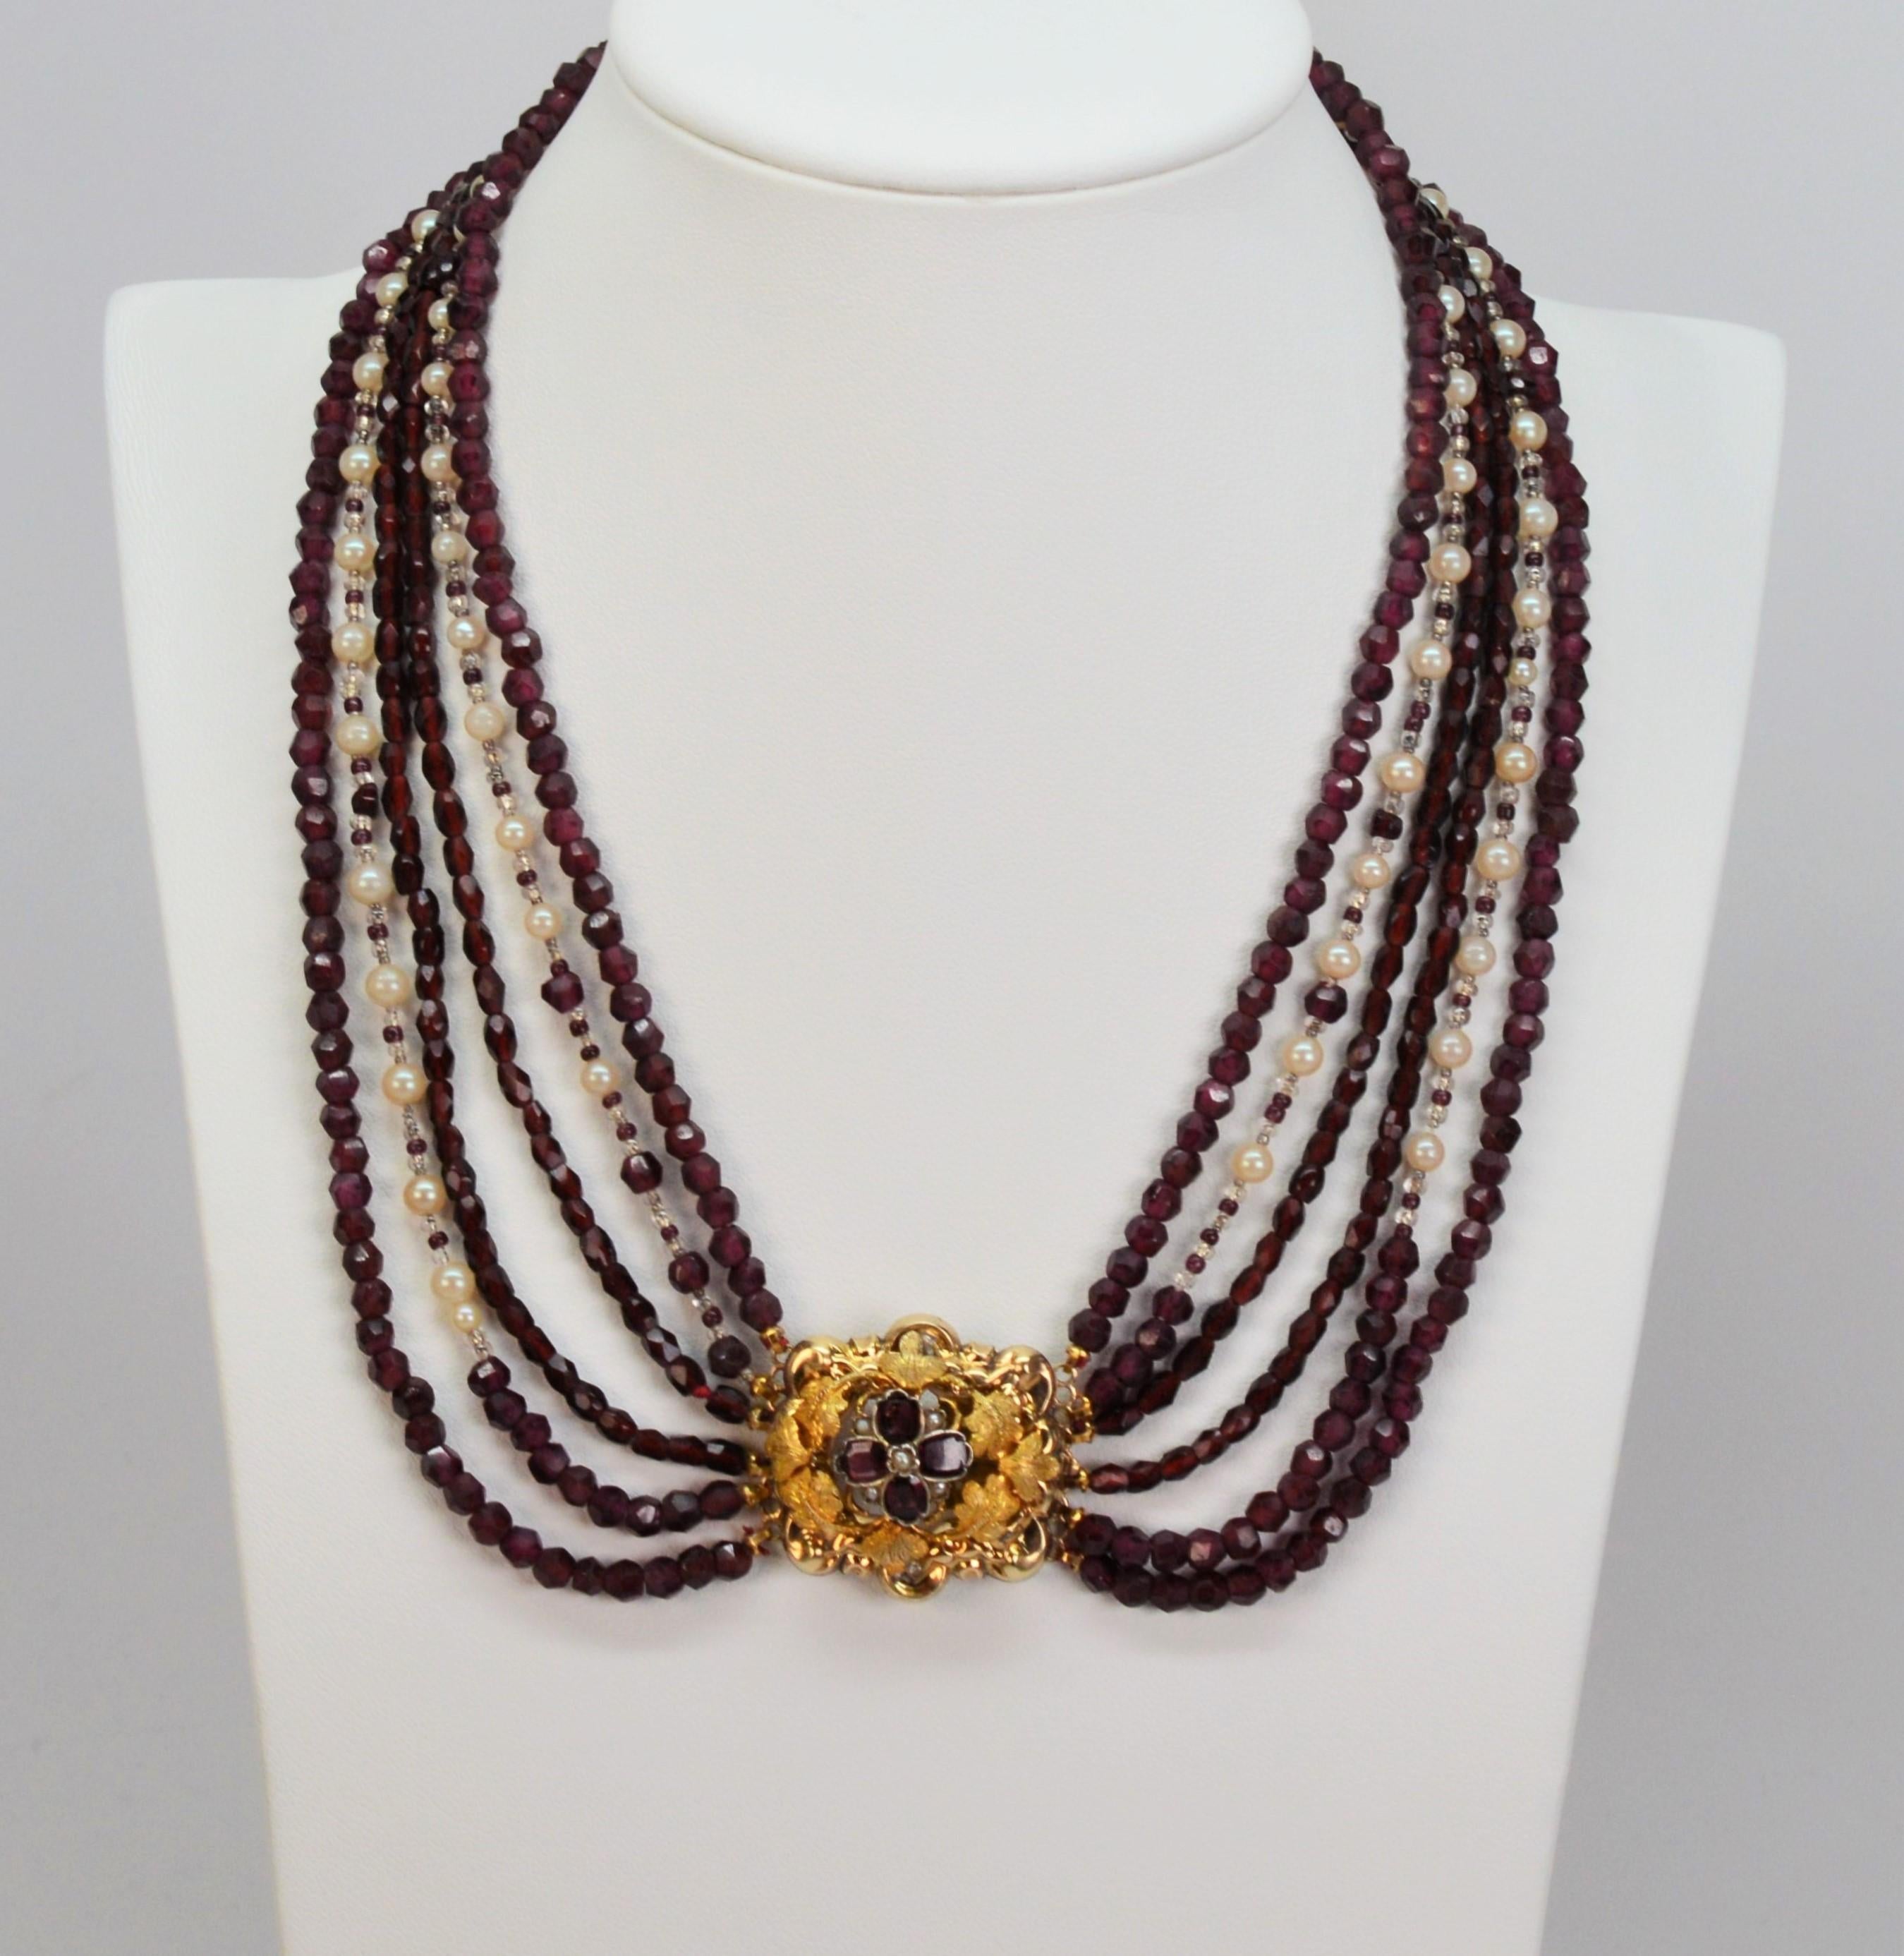 Garnet Pearl Multi Strand Necklace with Fancy Antique Jeweled Yellow Gold Clasp 2